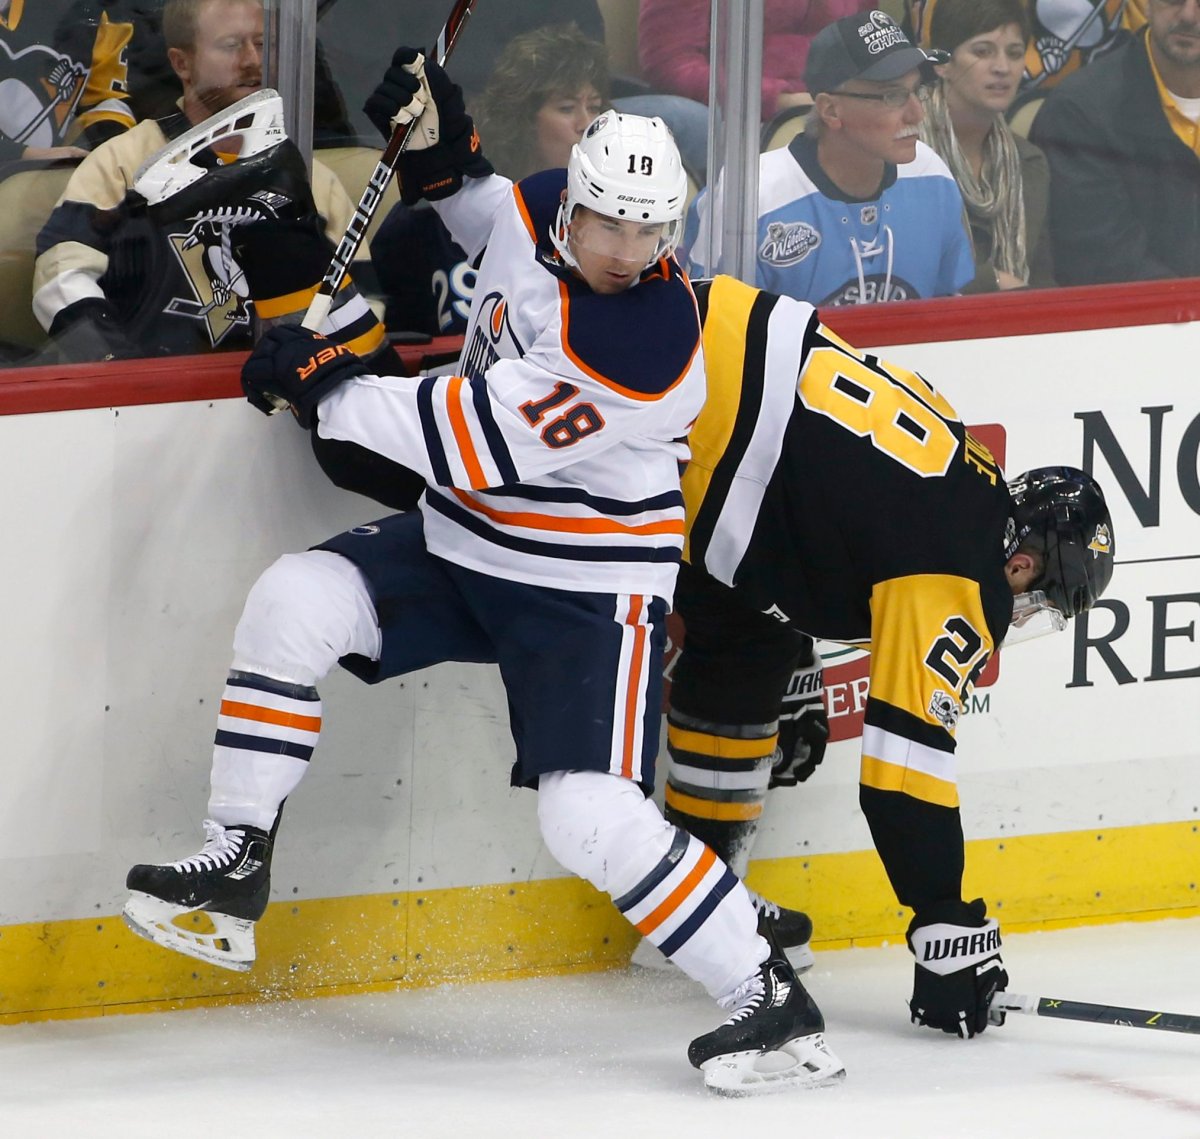 Edmonton Oilers' Ryan Strome (18) collides with Pittsburgh Penguins' Ian Cole (28) in the first period of an NHL hockey game in Pittsburgh, Tuesday, Oct. 24, 2017. (AP Photo/Gene J. Puskar).